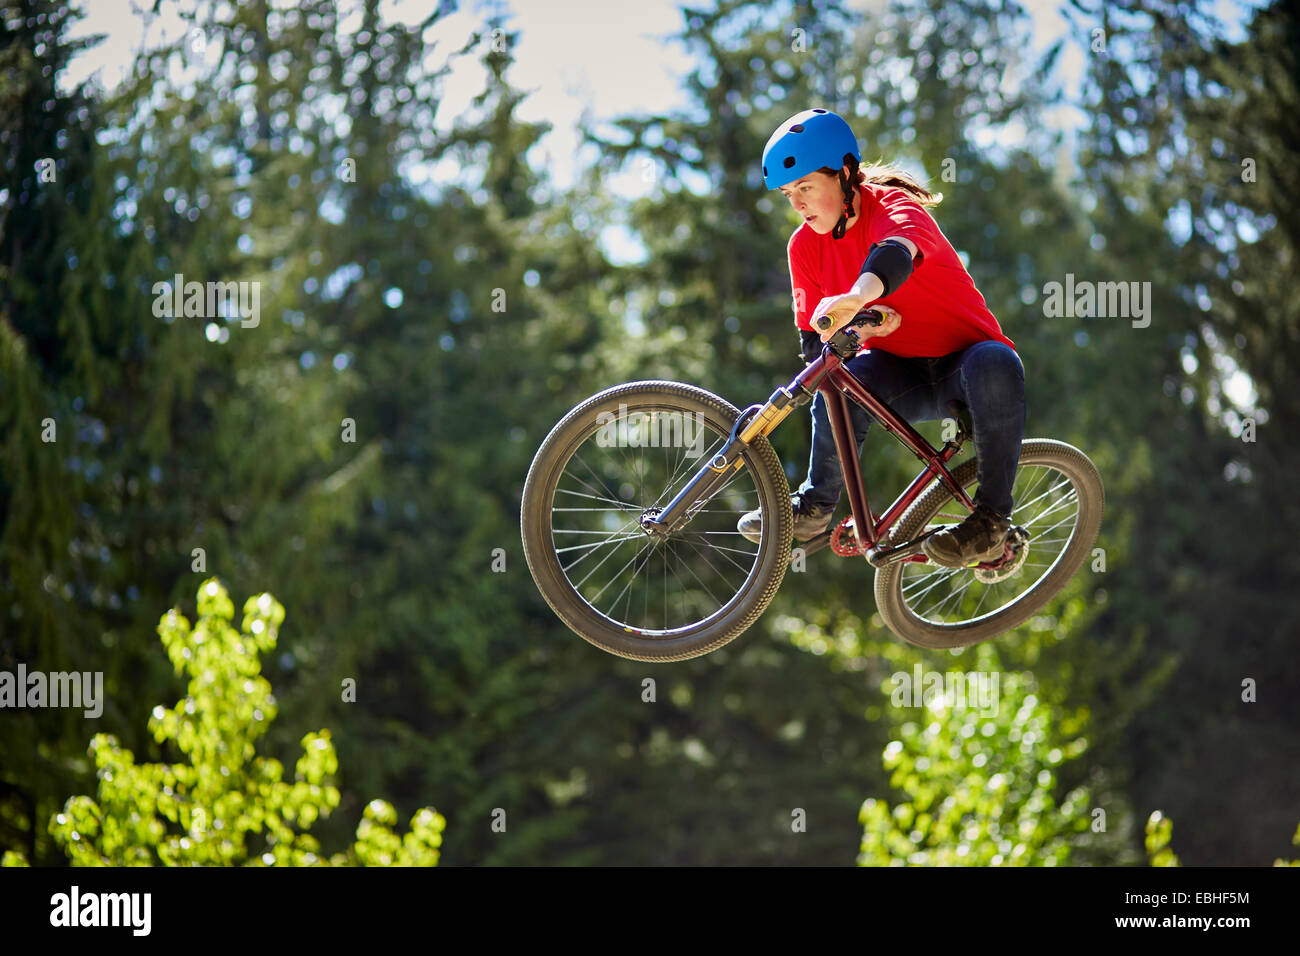 Young female bmx biker jumping mid air in forest Stock Photo